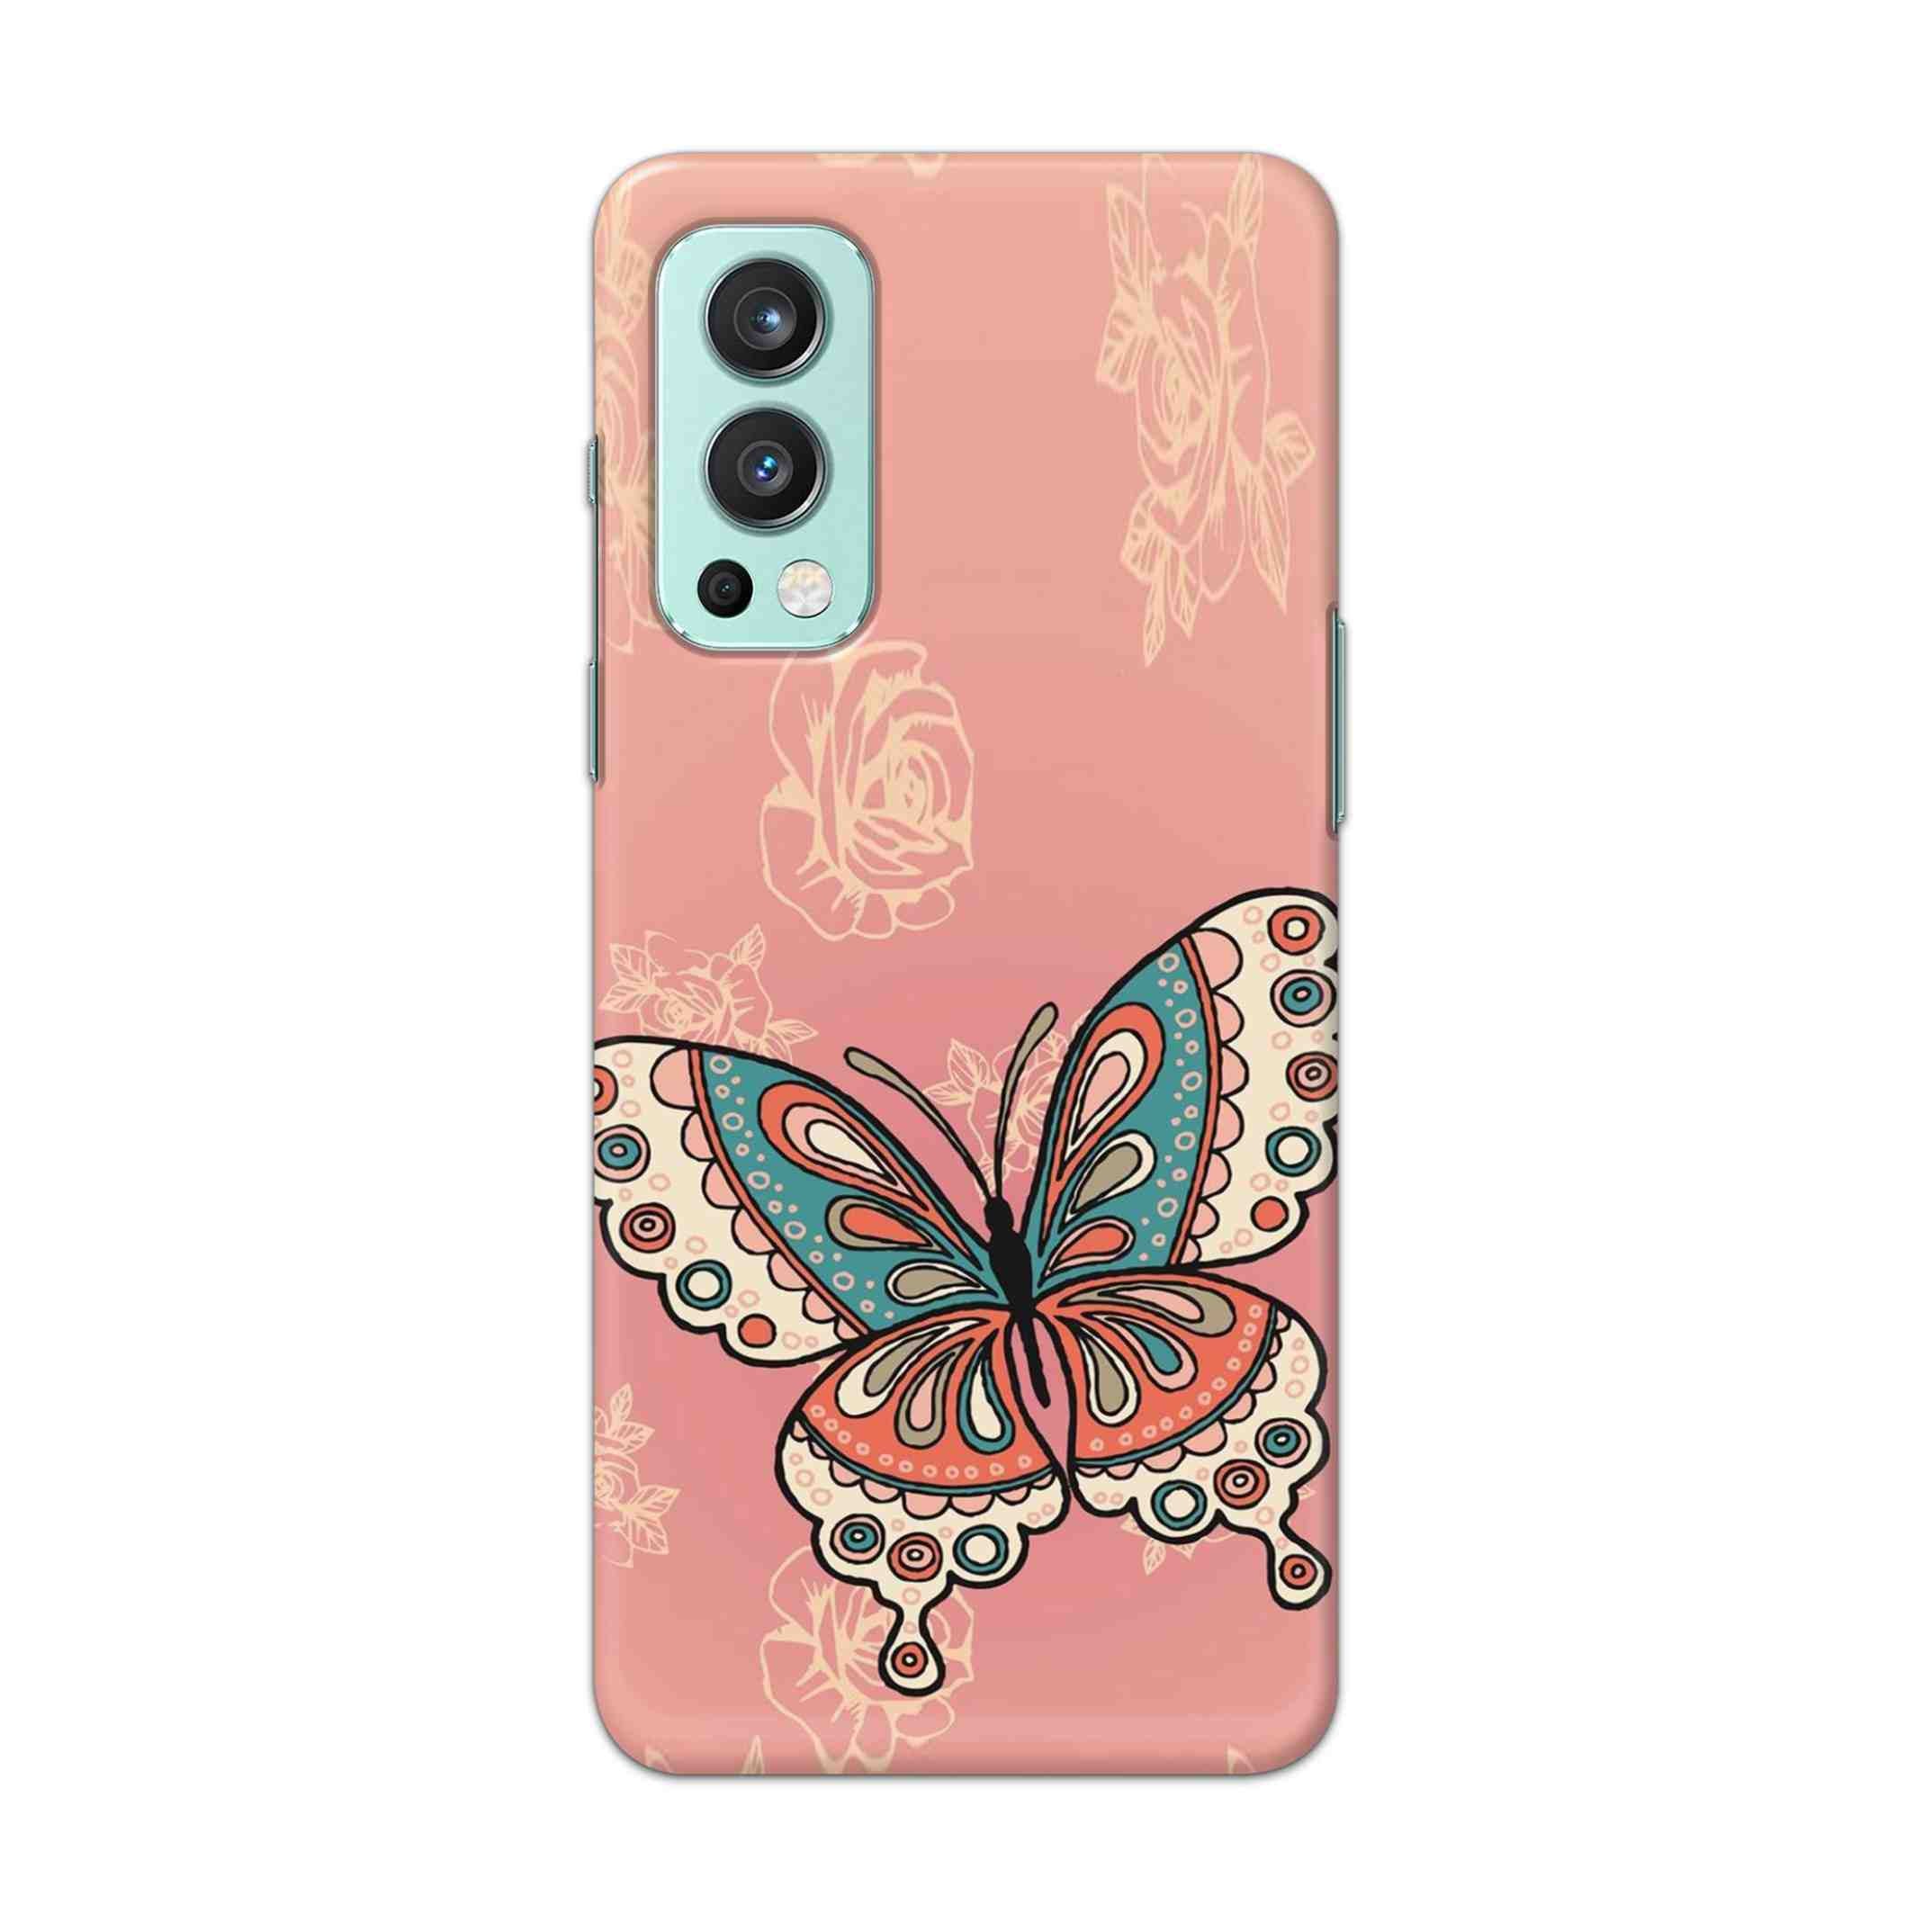 Buy Butterfly Hard Back Mobile Phone Case Cover For OnePlus Nord 2 5G Online